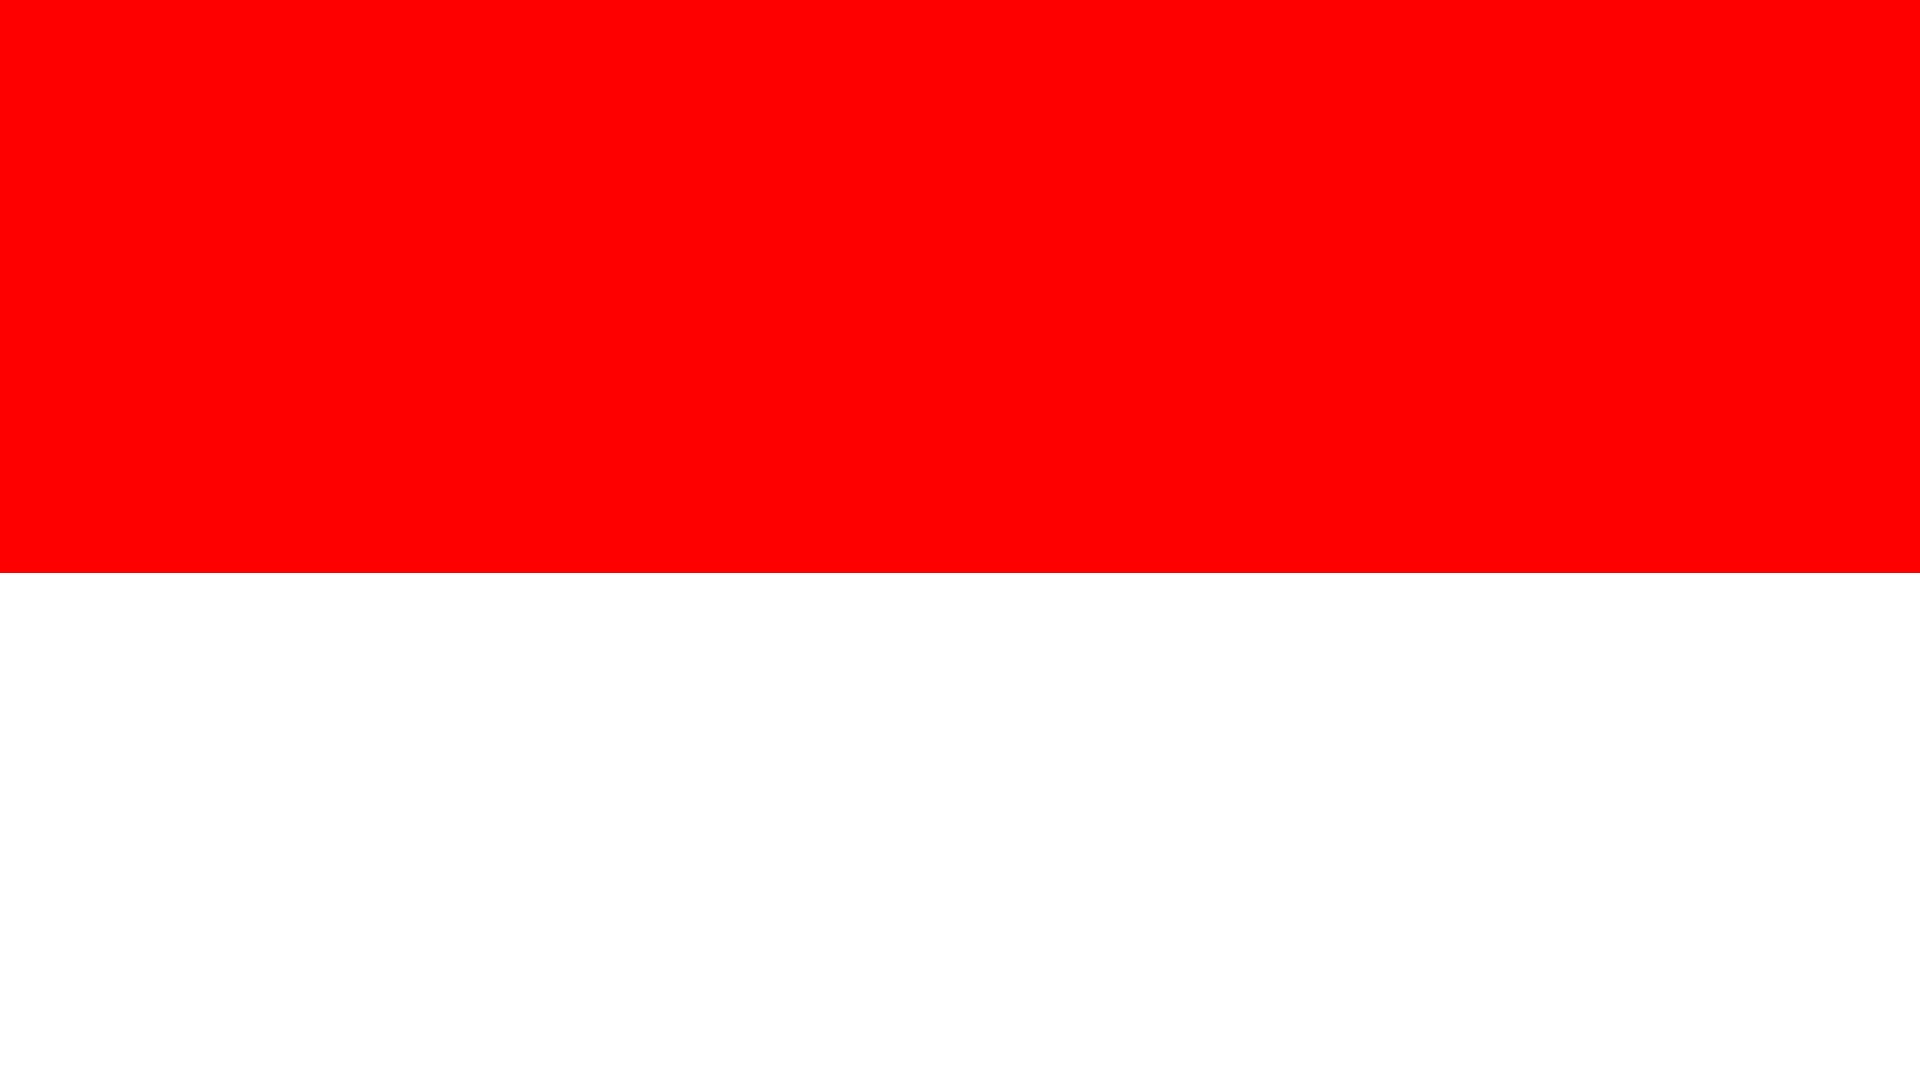 An image of the flag of Indonesia